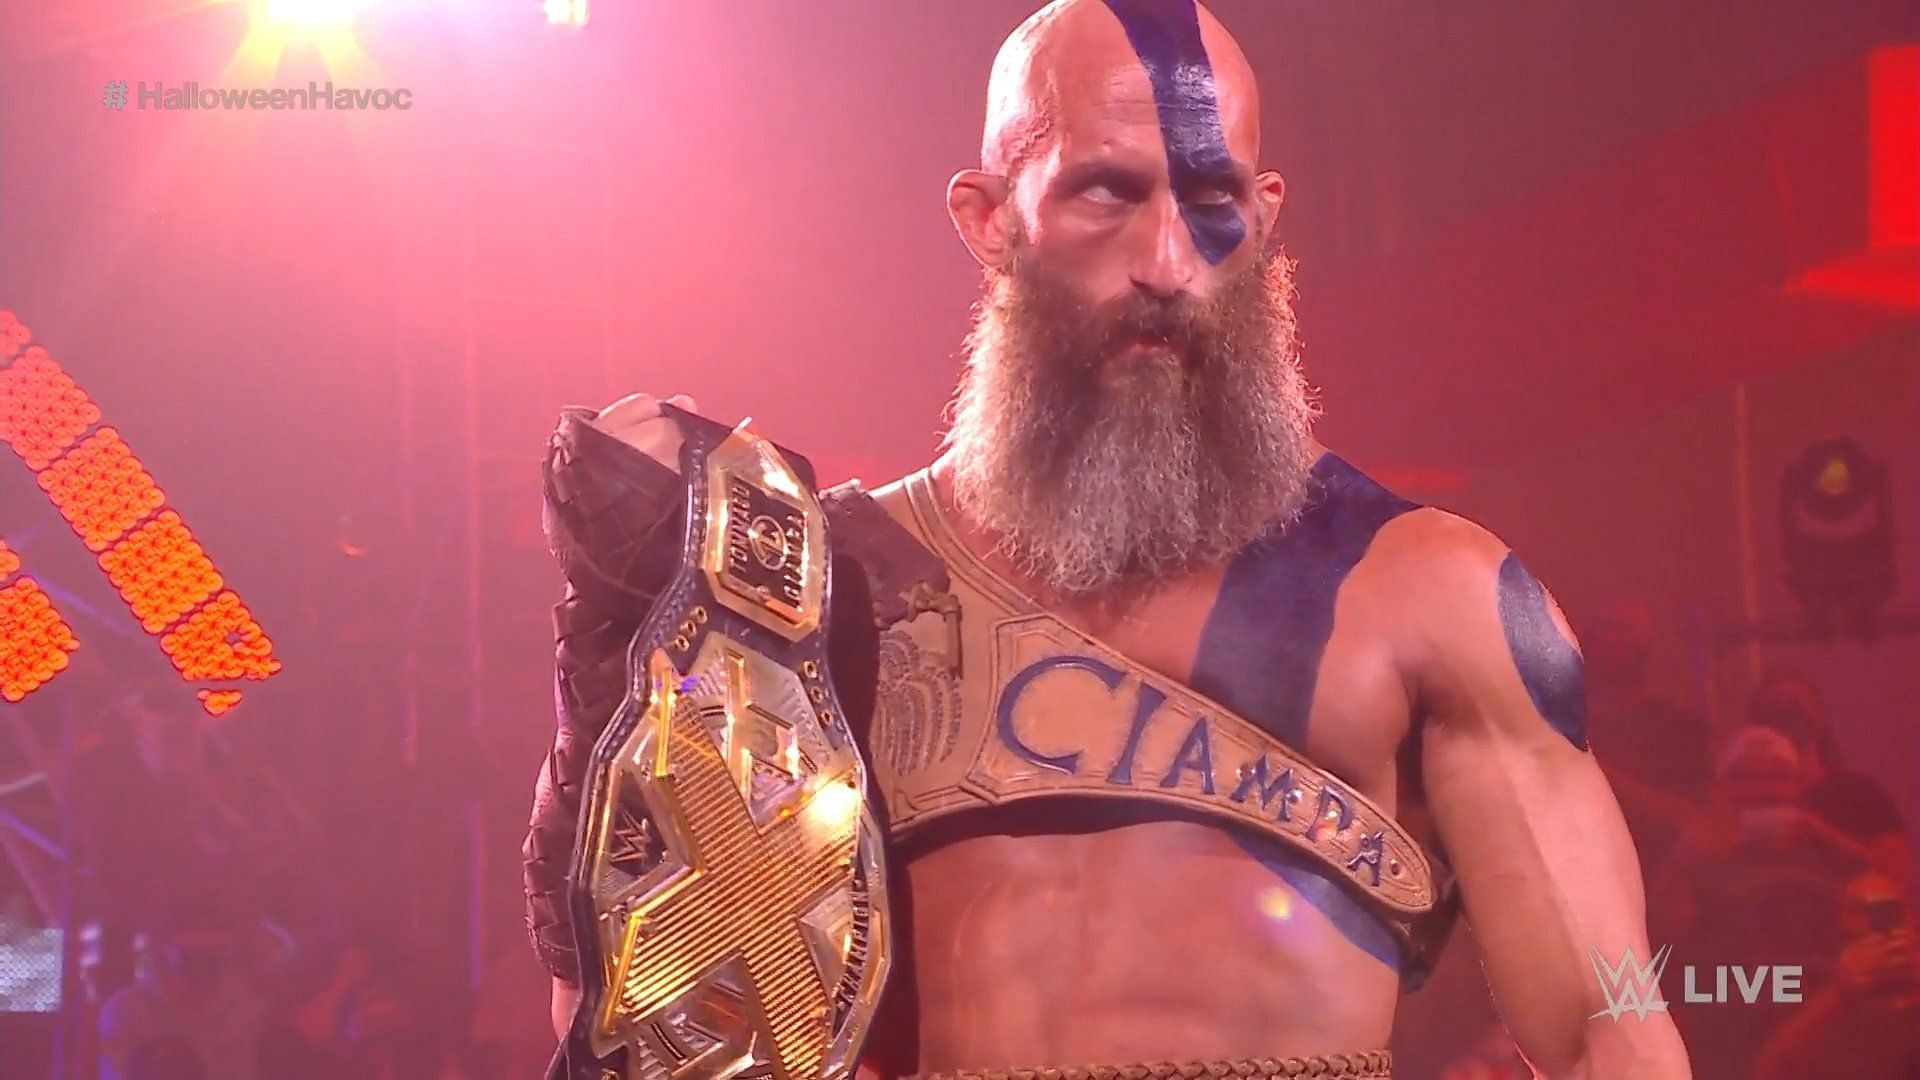 Ciampa was ready to defend his title at NXT Halloween Havoc